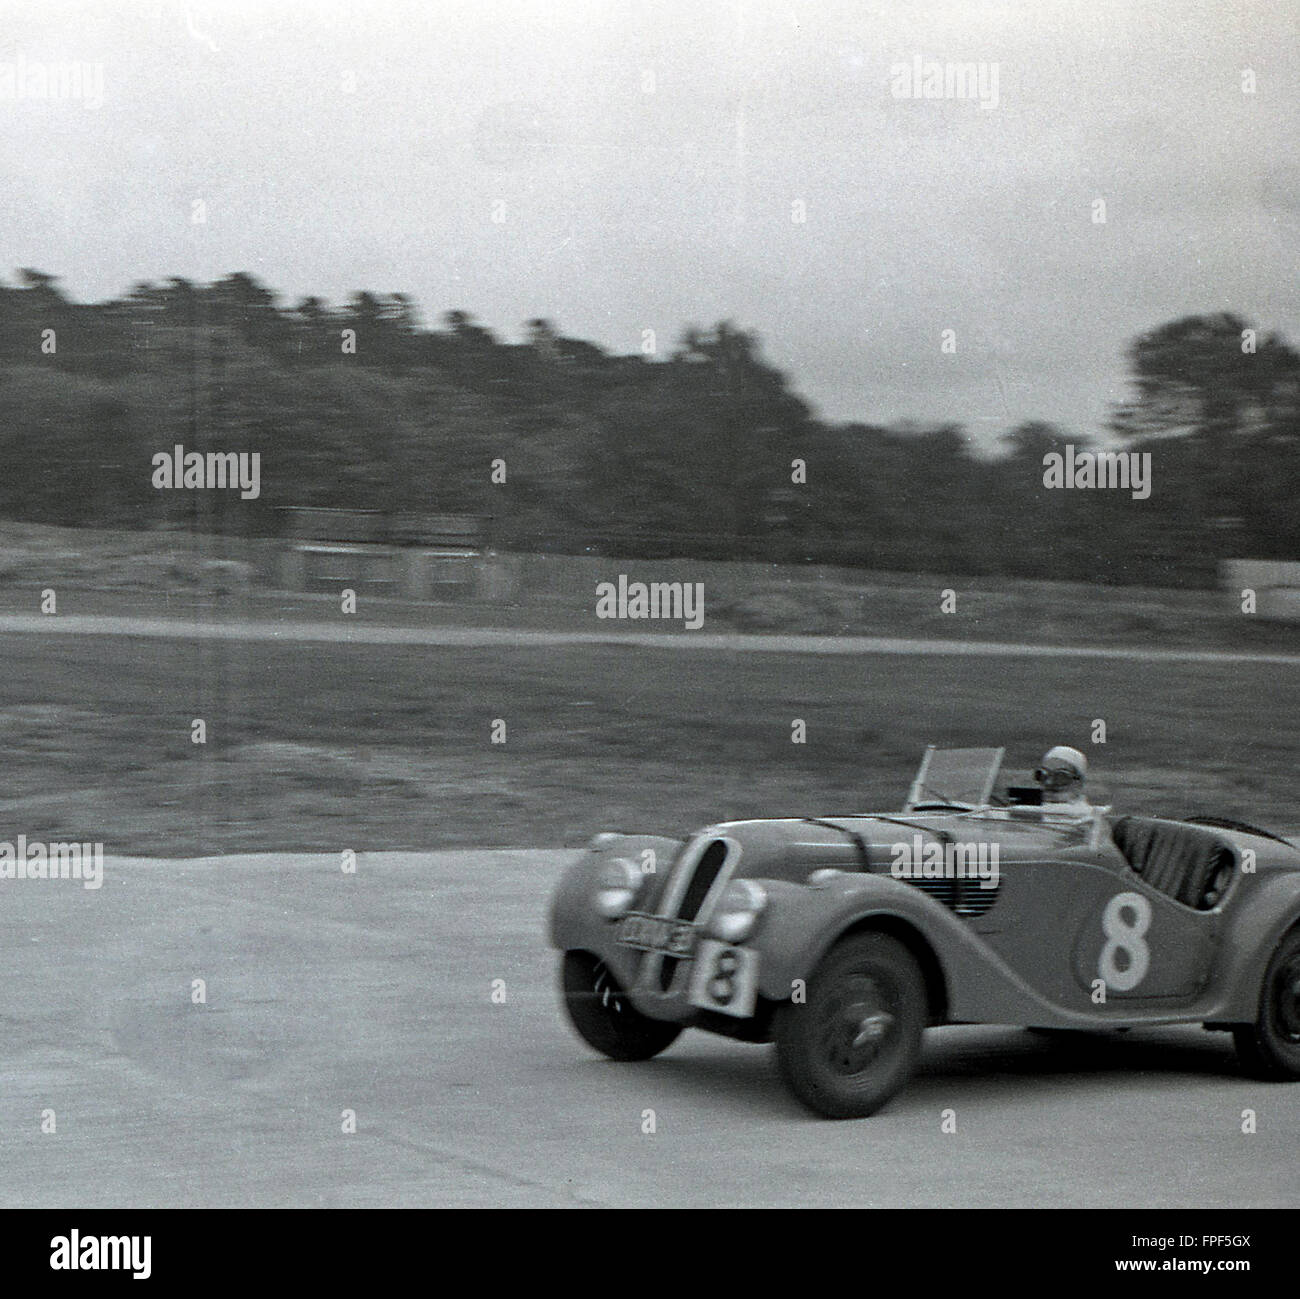 1930s historical, an open top two-seater motor racing car of the era on the Brooklands race track, Weybridge, Surrey. Opened in 1907, the circuit is considered the birthplace of British motorsport. Stock Photo